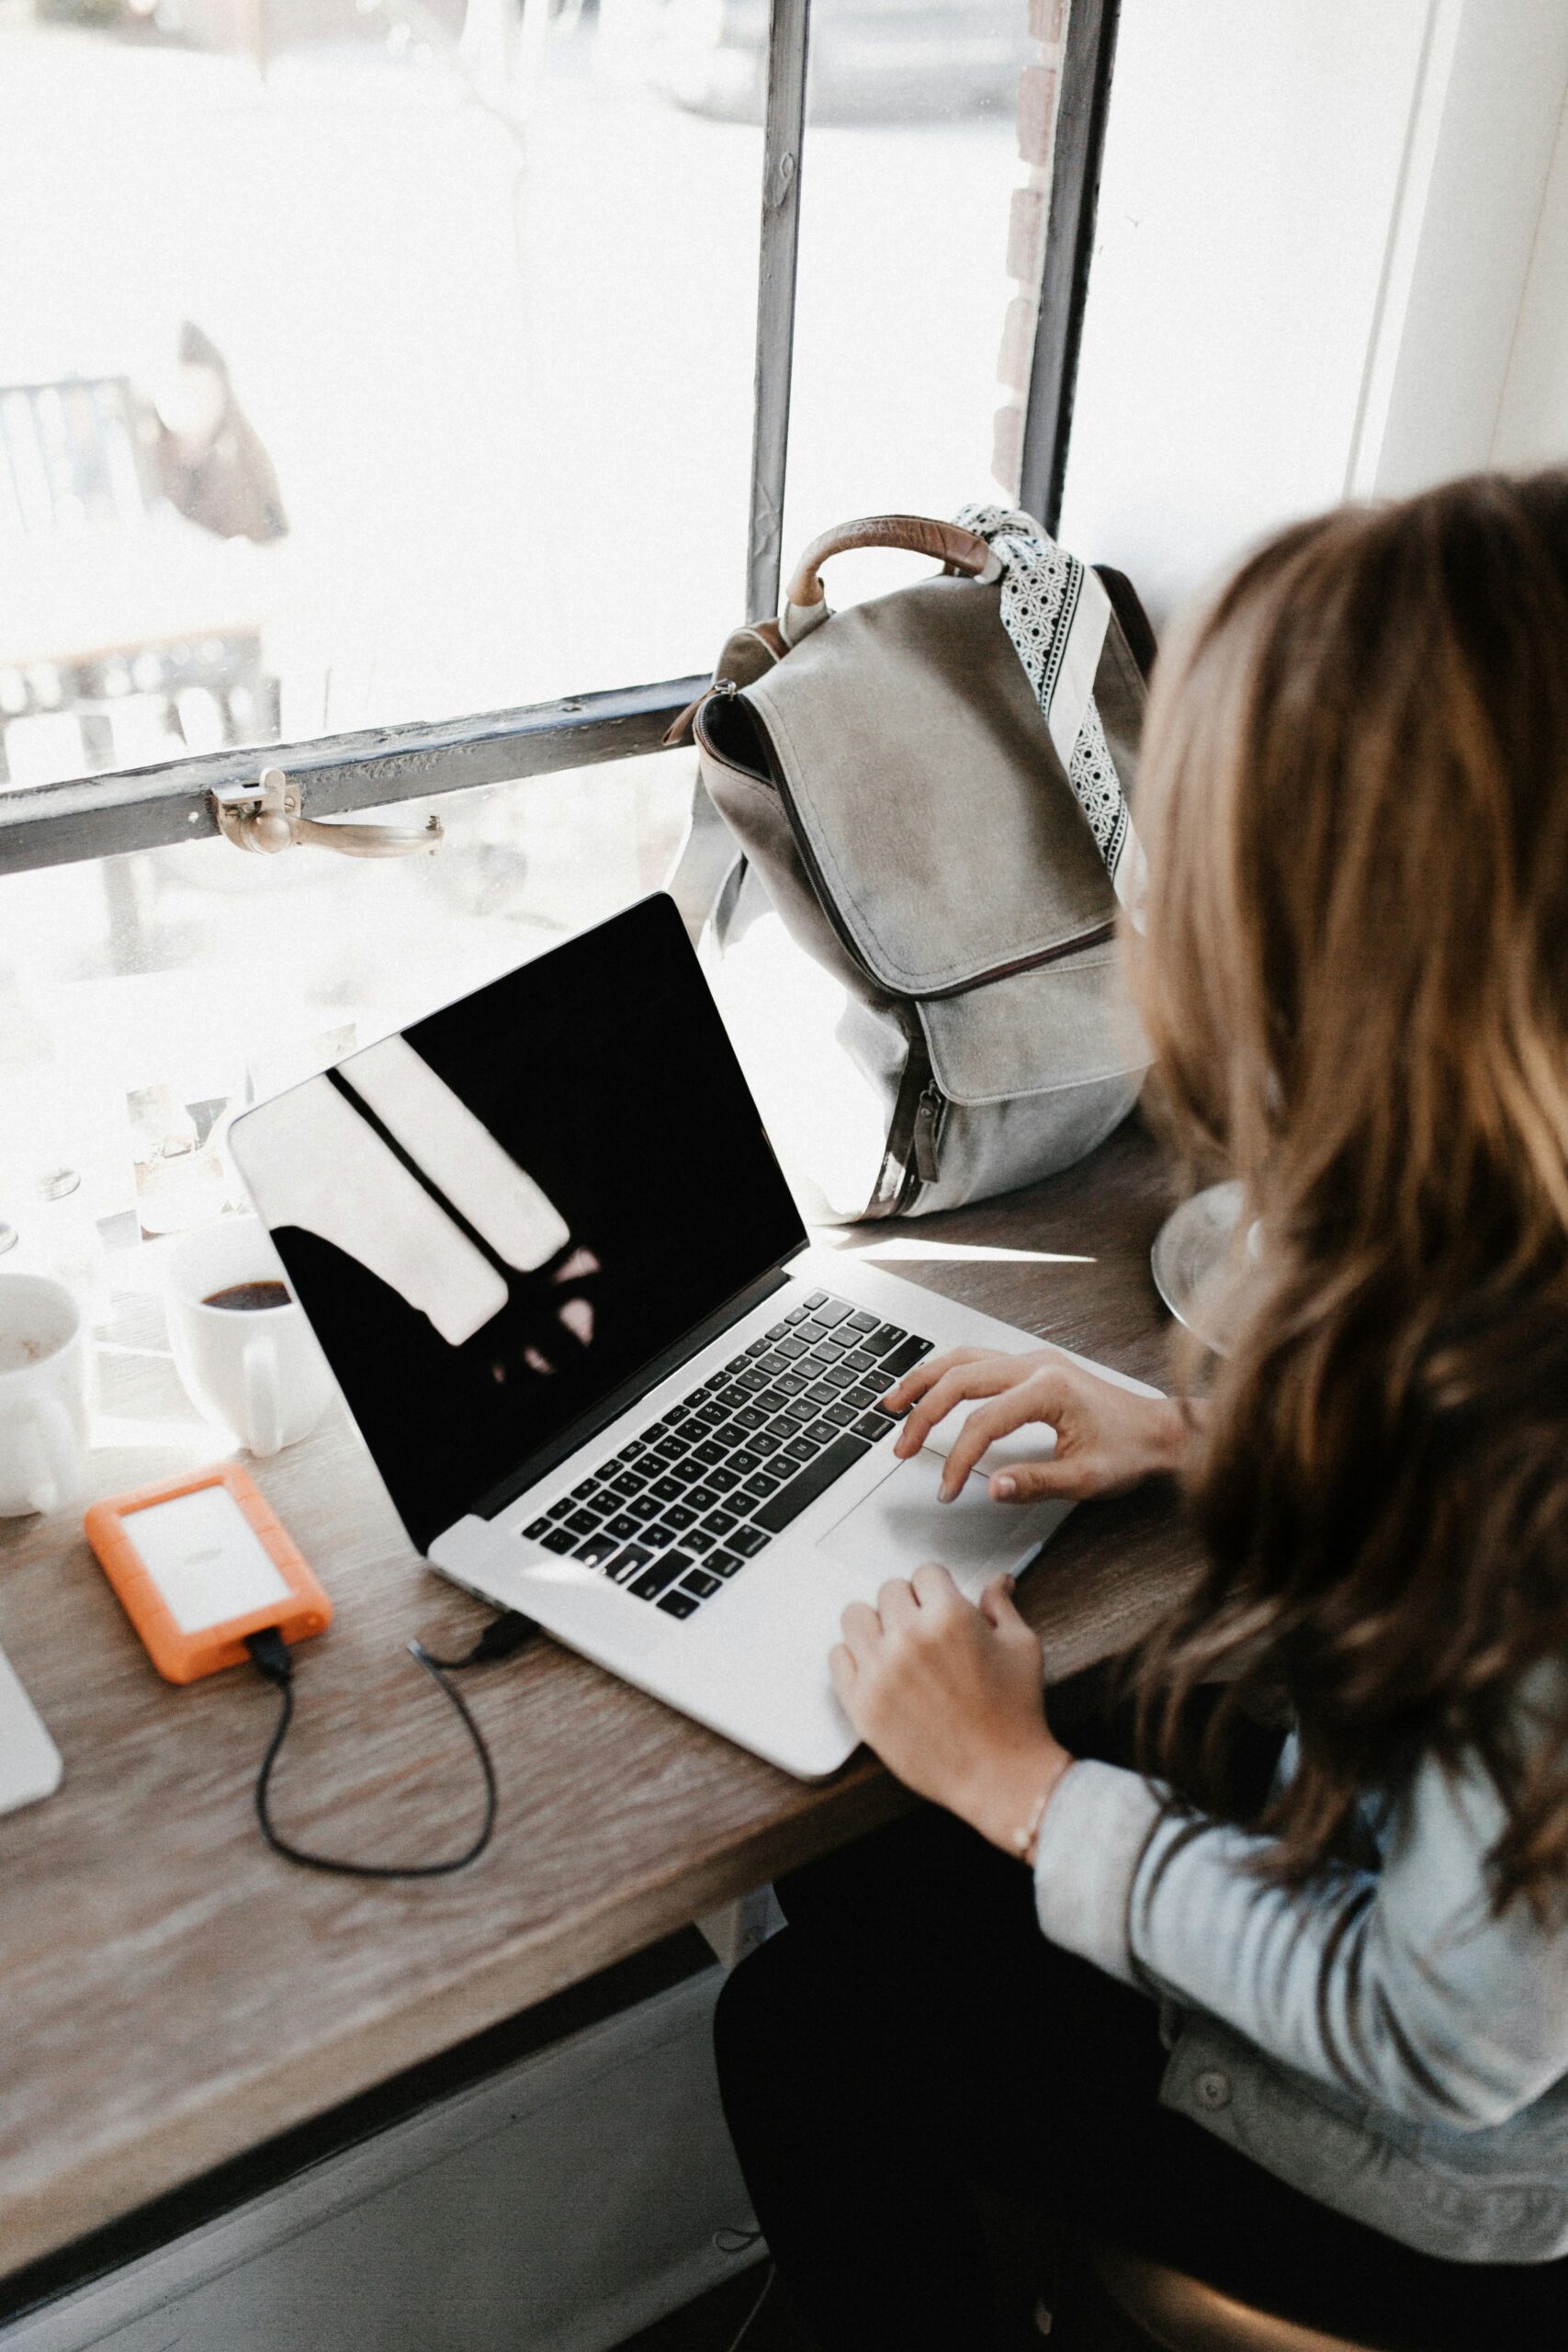 Working mom on laptop at a coffee shop with her baby backpack on the table. 8 tips to help working Manhattan moms balance career and motherhood in New York.